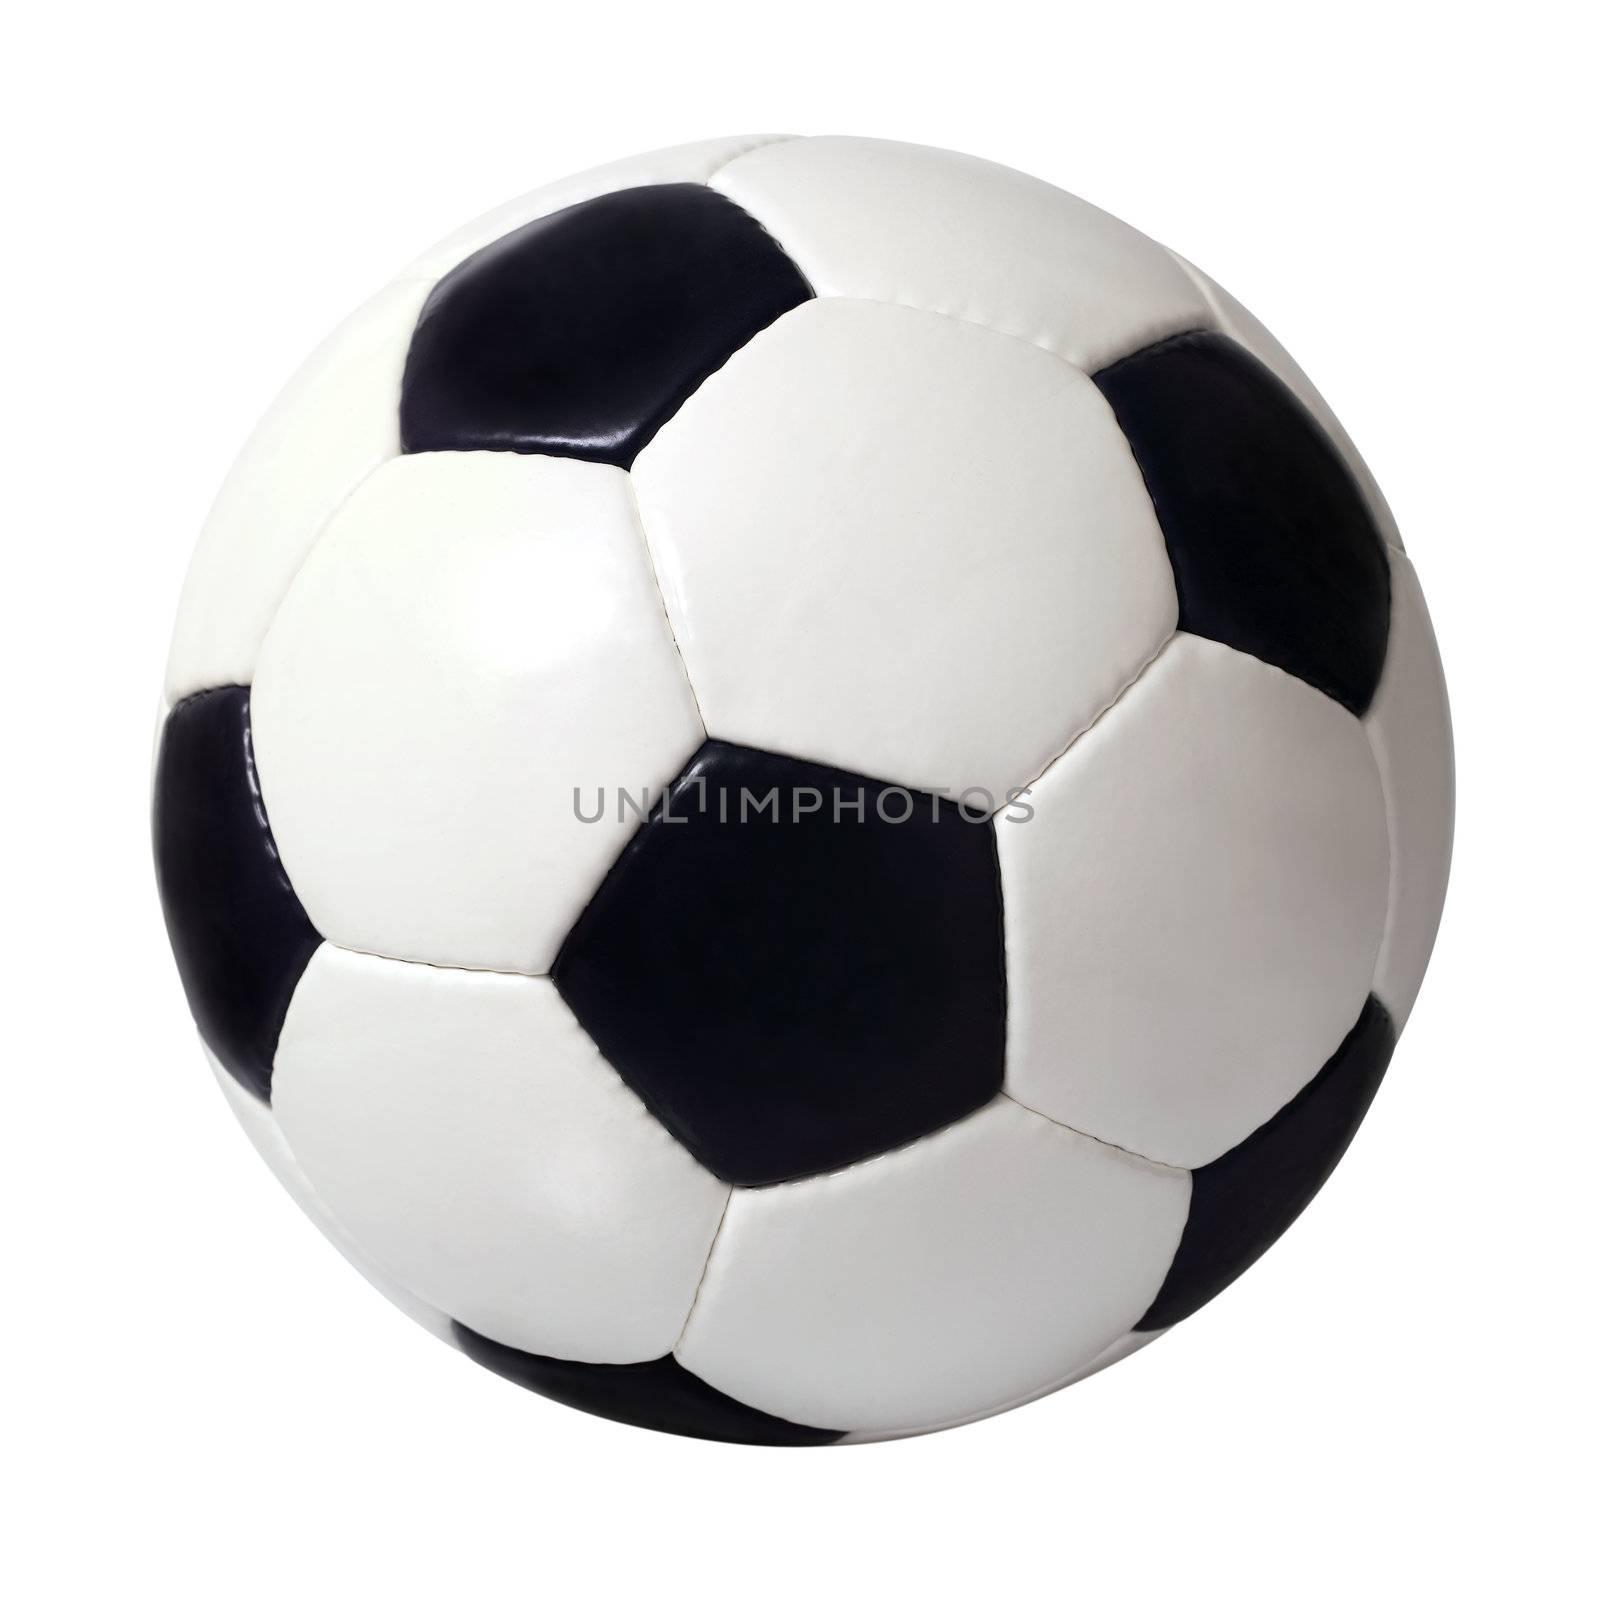 Soccer ball by sumners